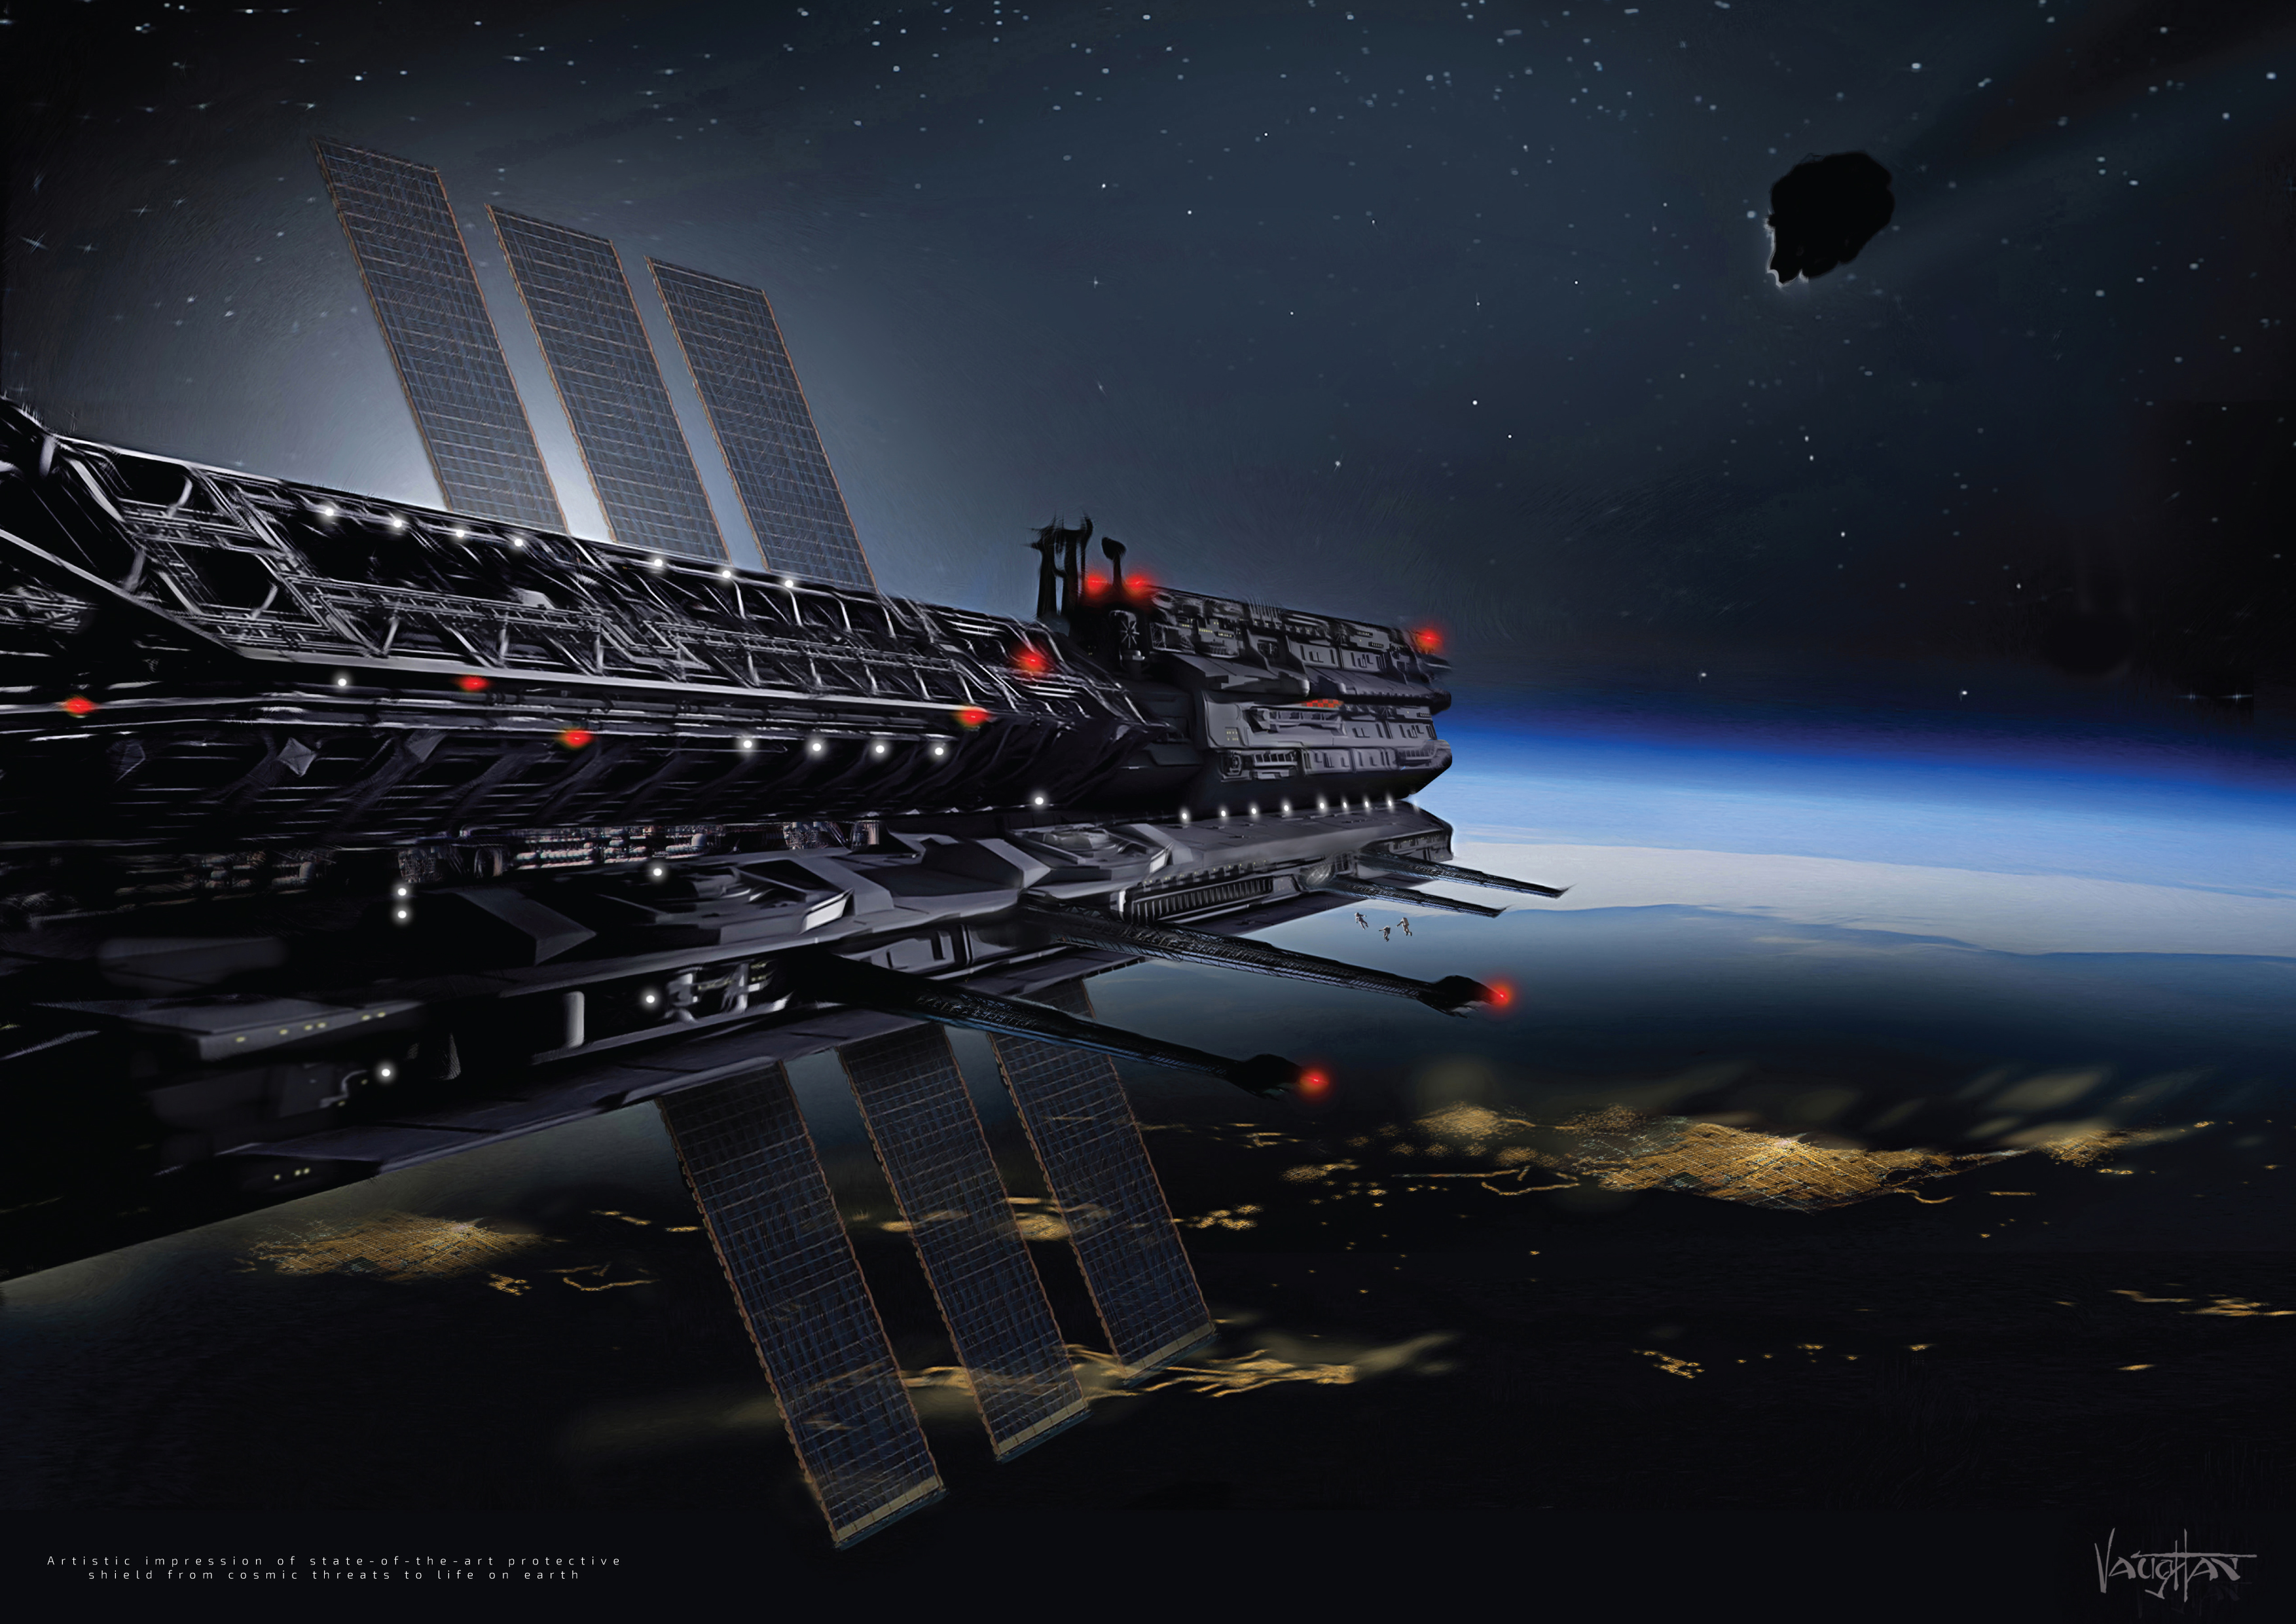 Asgardia, Proposed Space-Based Nation Accepting Citizenship Applications